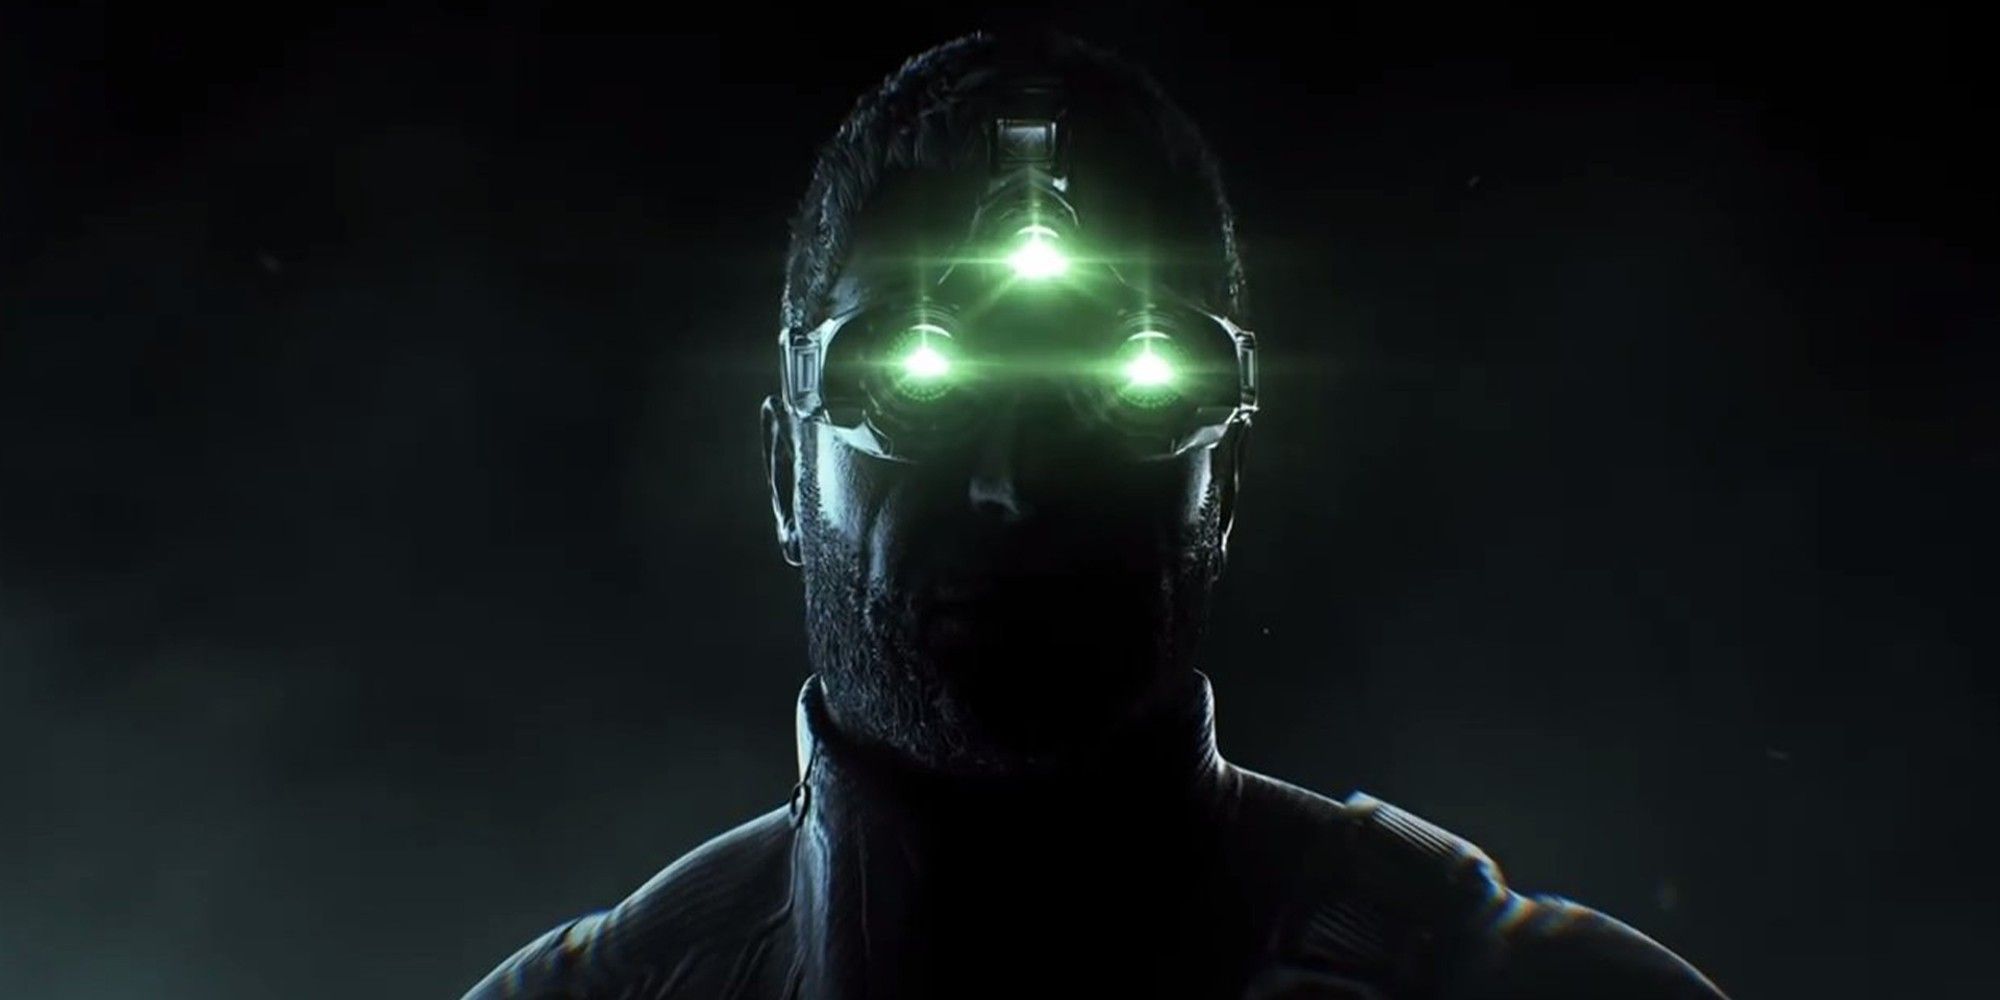 The Next Splinter Cell Game Is In Early Development According To New Report